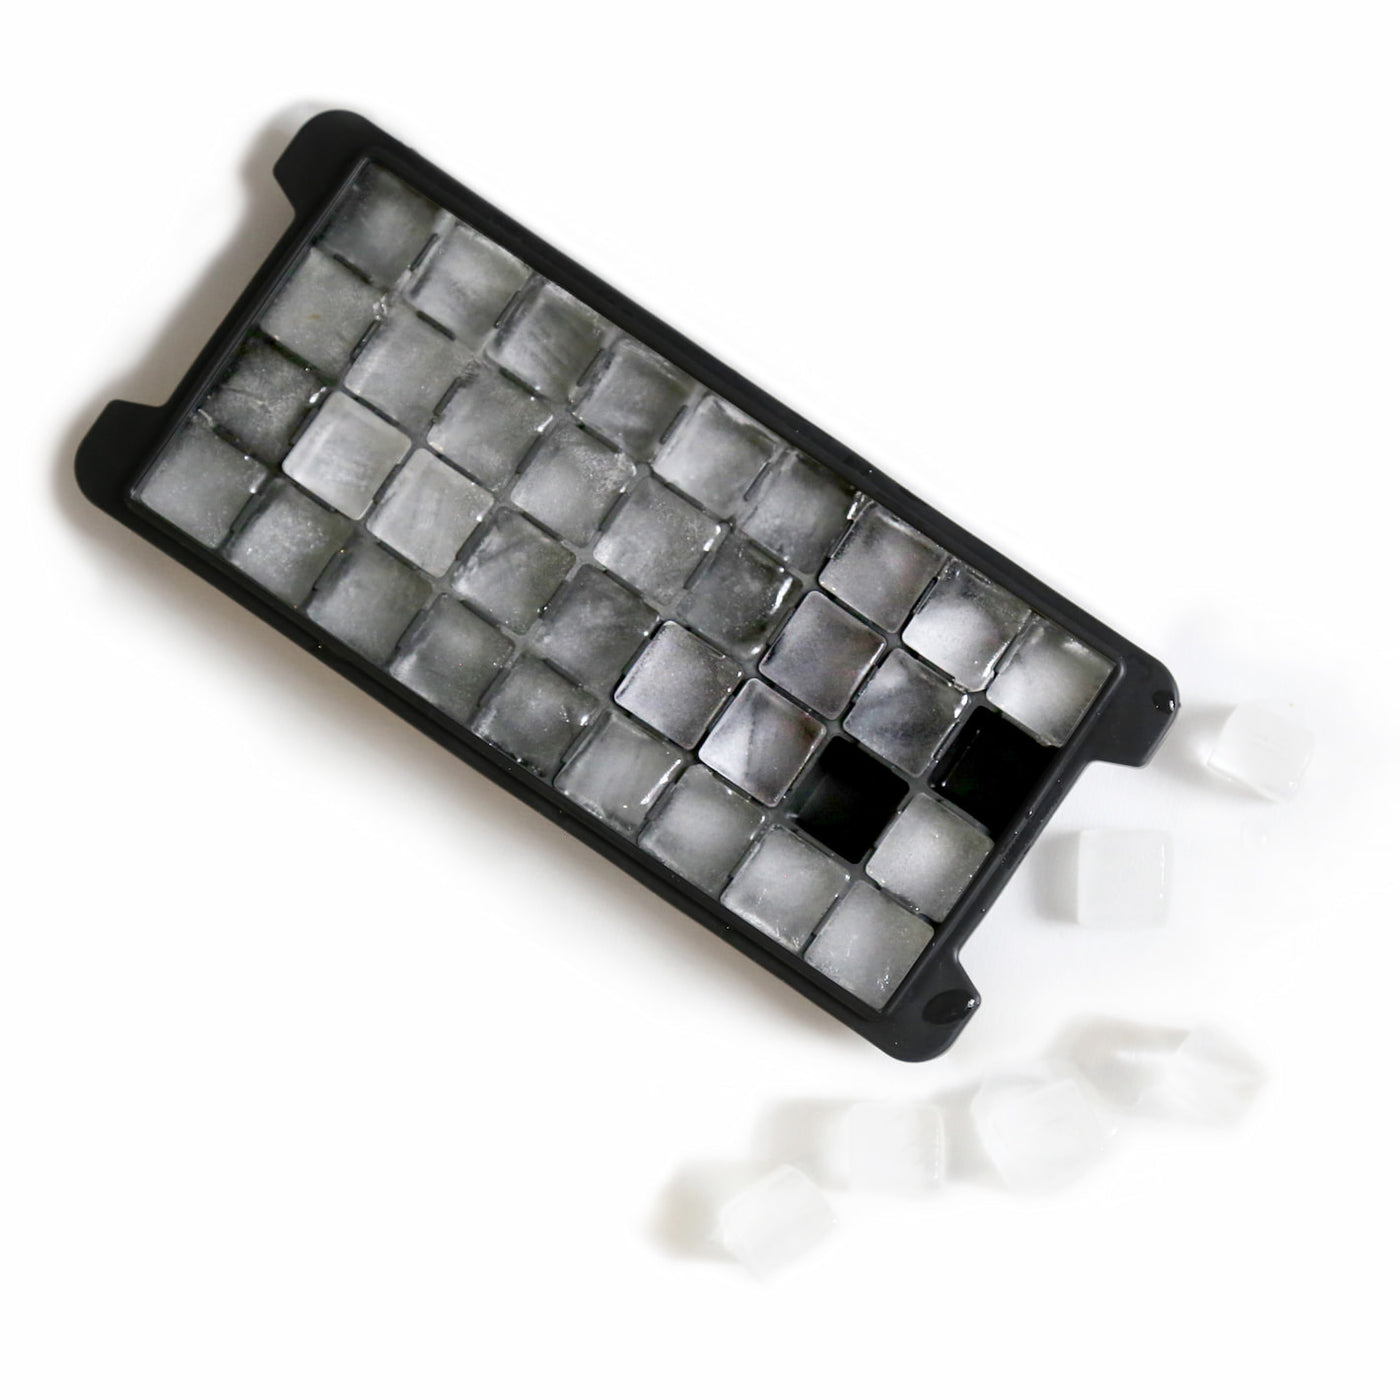 Ice tray, black silicon, 36 small sized cubes, overhead view